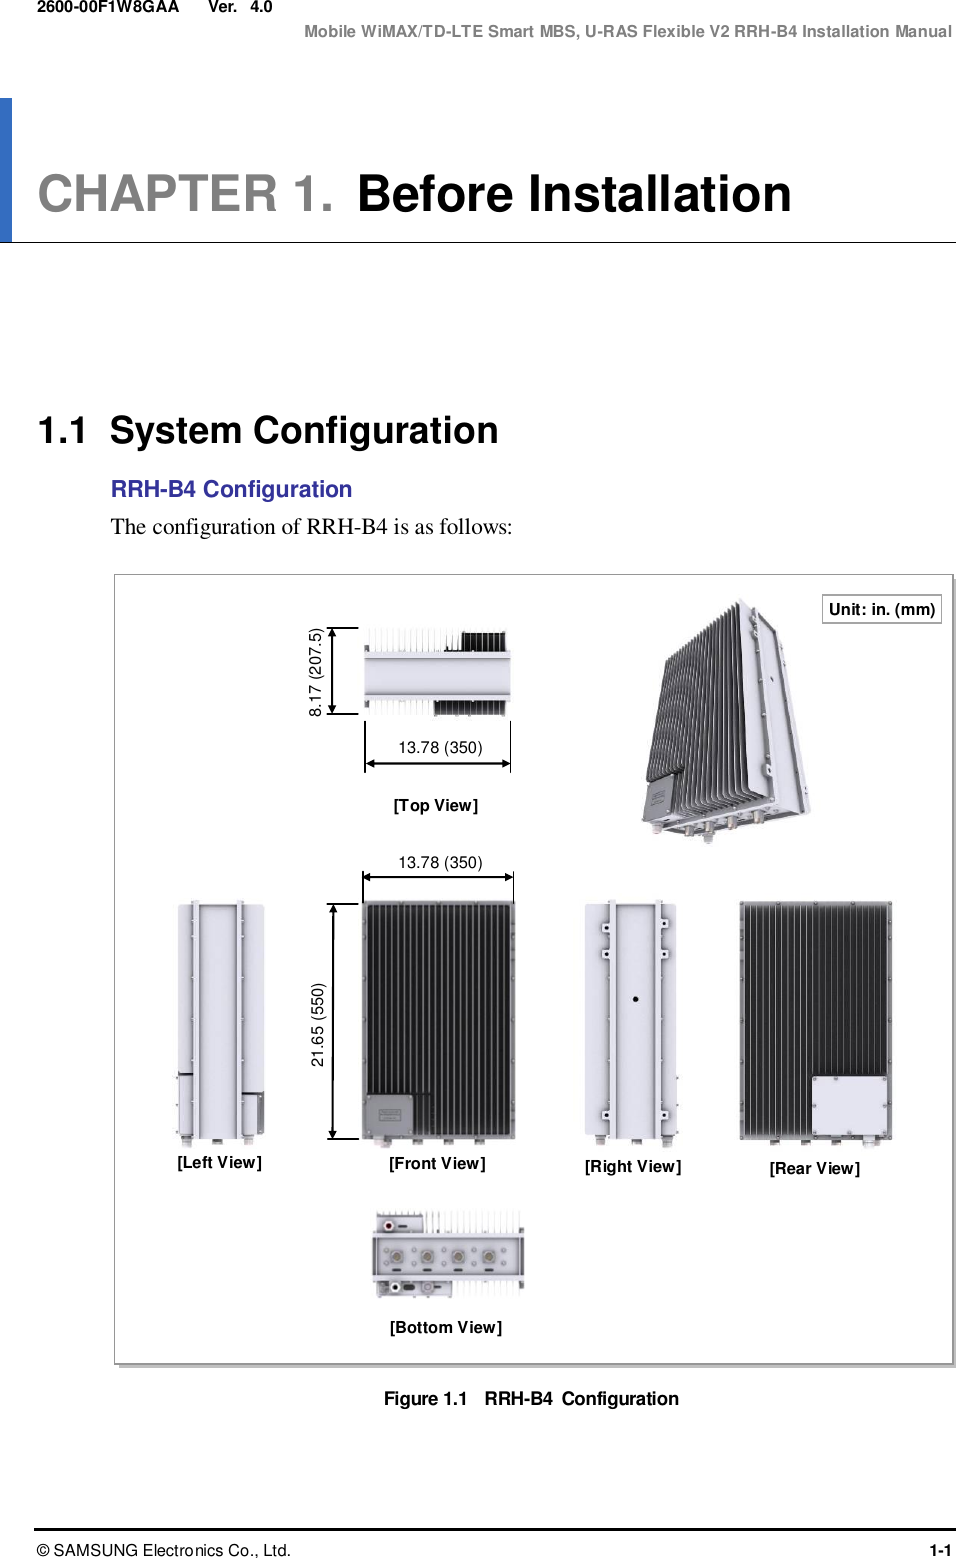  Ver.  Mobile WiMAX/TD-LTE Smart MBS, U-RAS Flexible V2 RRH-B4 Installation Manual ©  SAMSUNG Electronics Co., Ltd.  1-1 2600-00F1W8GAA 4.0 CHAPTER 1.  Before Installation      1.1  System Configuration RRH-B4 Configuration The configuration of RRH-B4 is as follows:  Figure 1.1  RRH-B4  Configuration  13.78 (350) [Front View] [Right View] [Left View] [Rear View] Unit: in. (mm) 21.65 (550) [Bottom View] [Top View] 8.17 (207.5) 13.78 (350) 